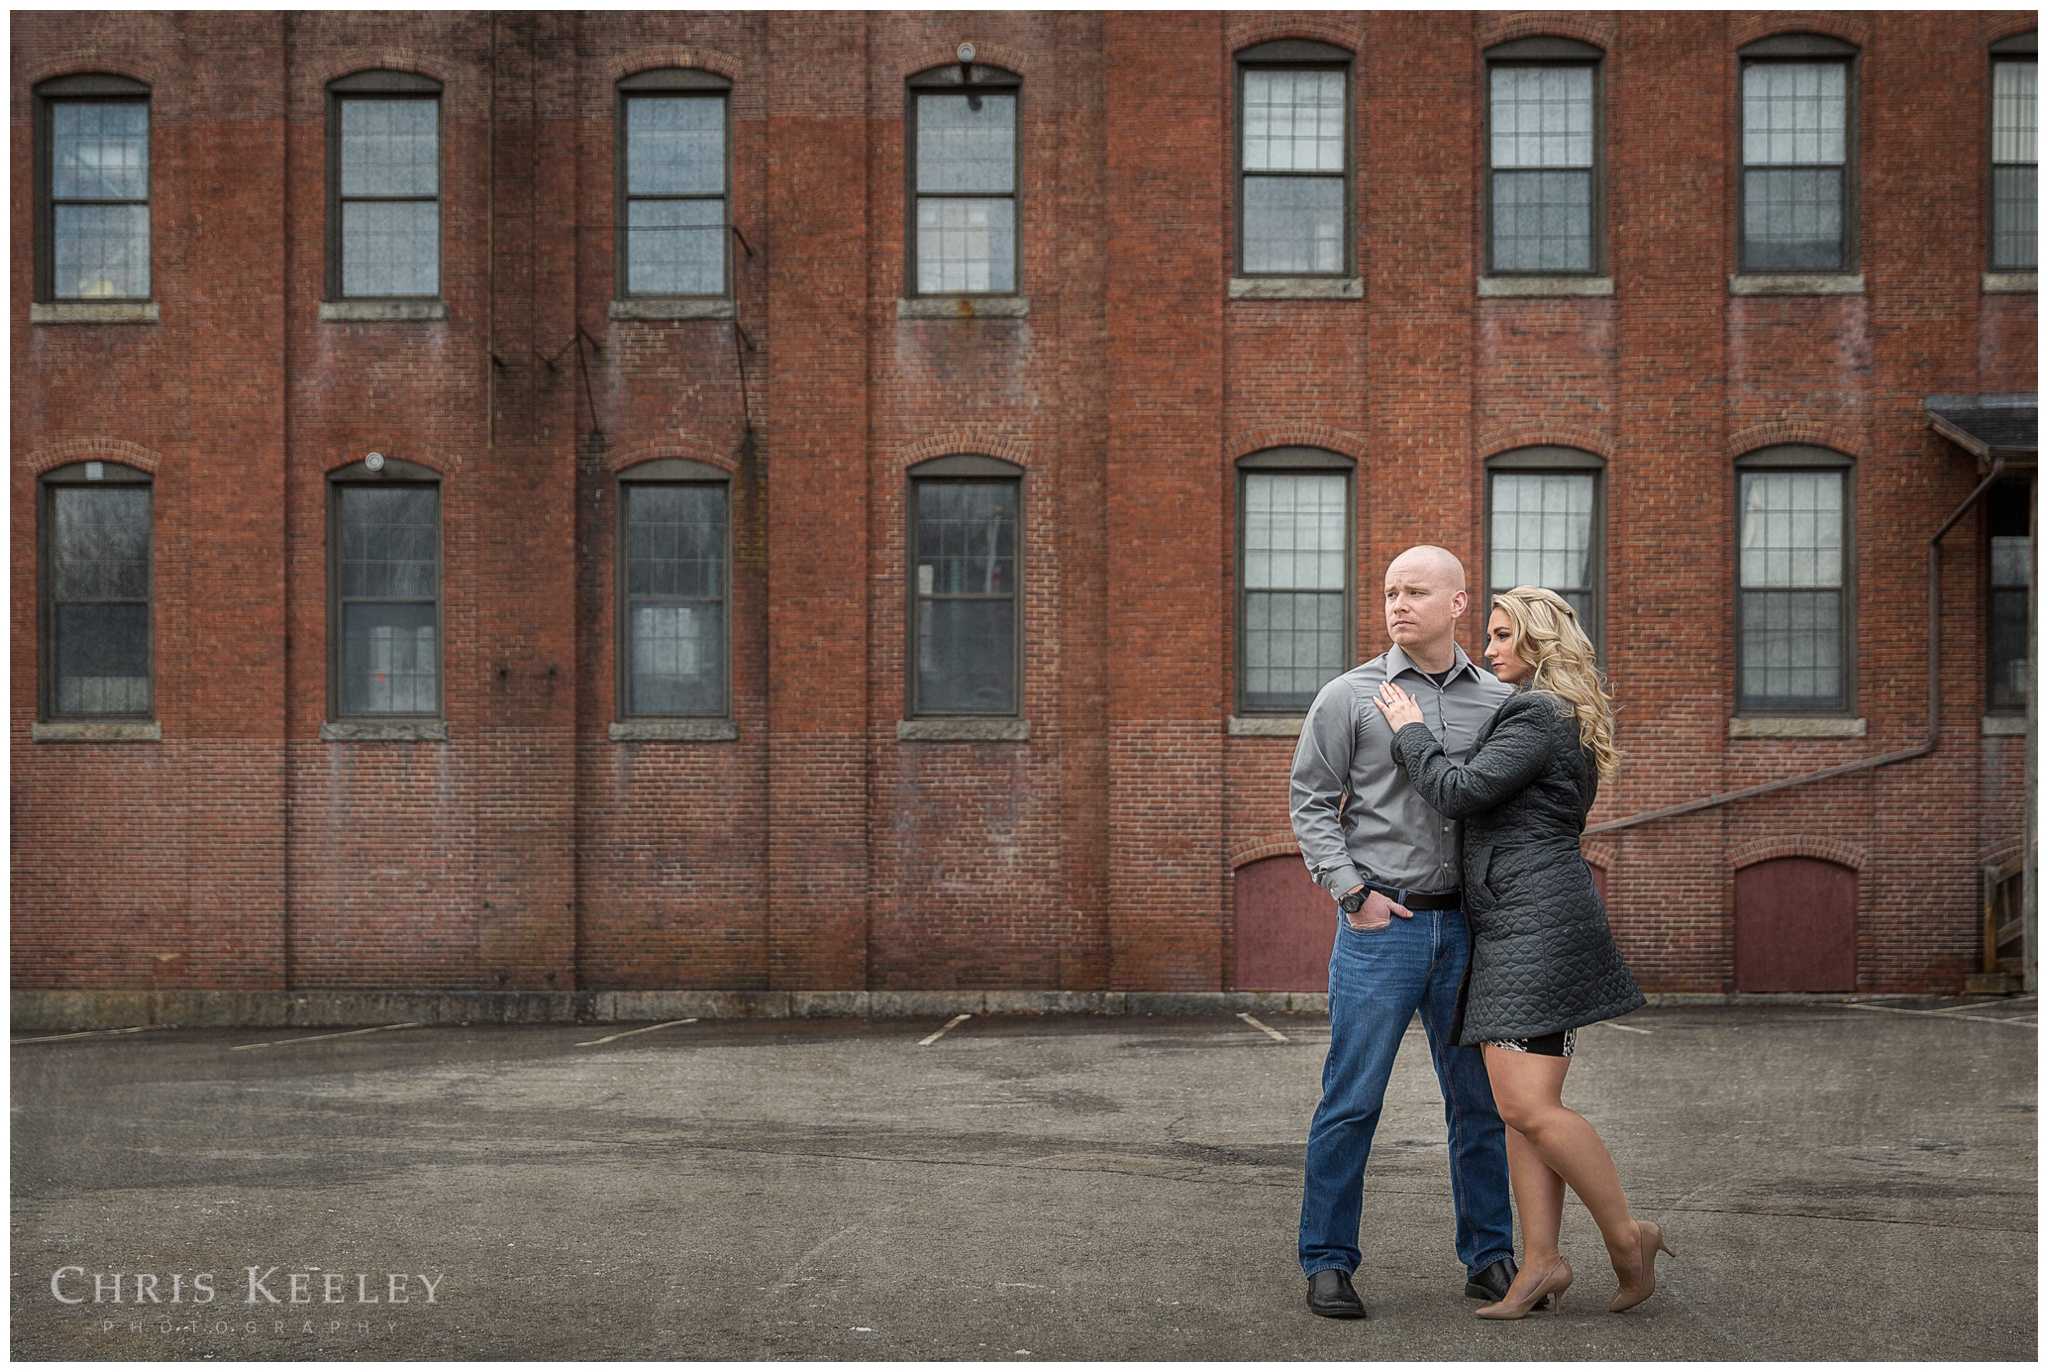 winter-engagement-pictures-wedding-photographer-chris-keeley-photography-05.jpg